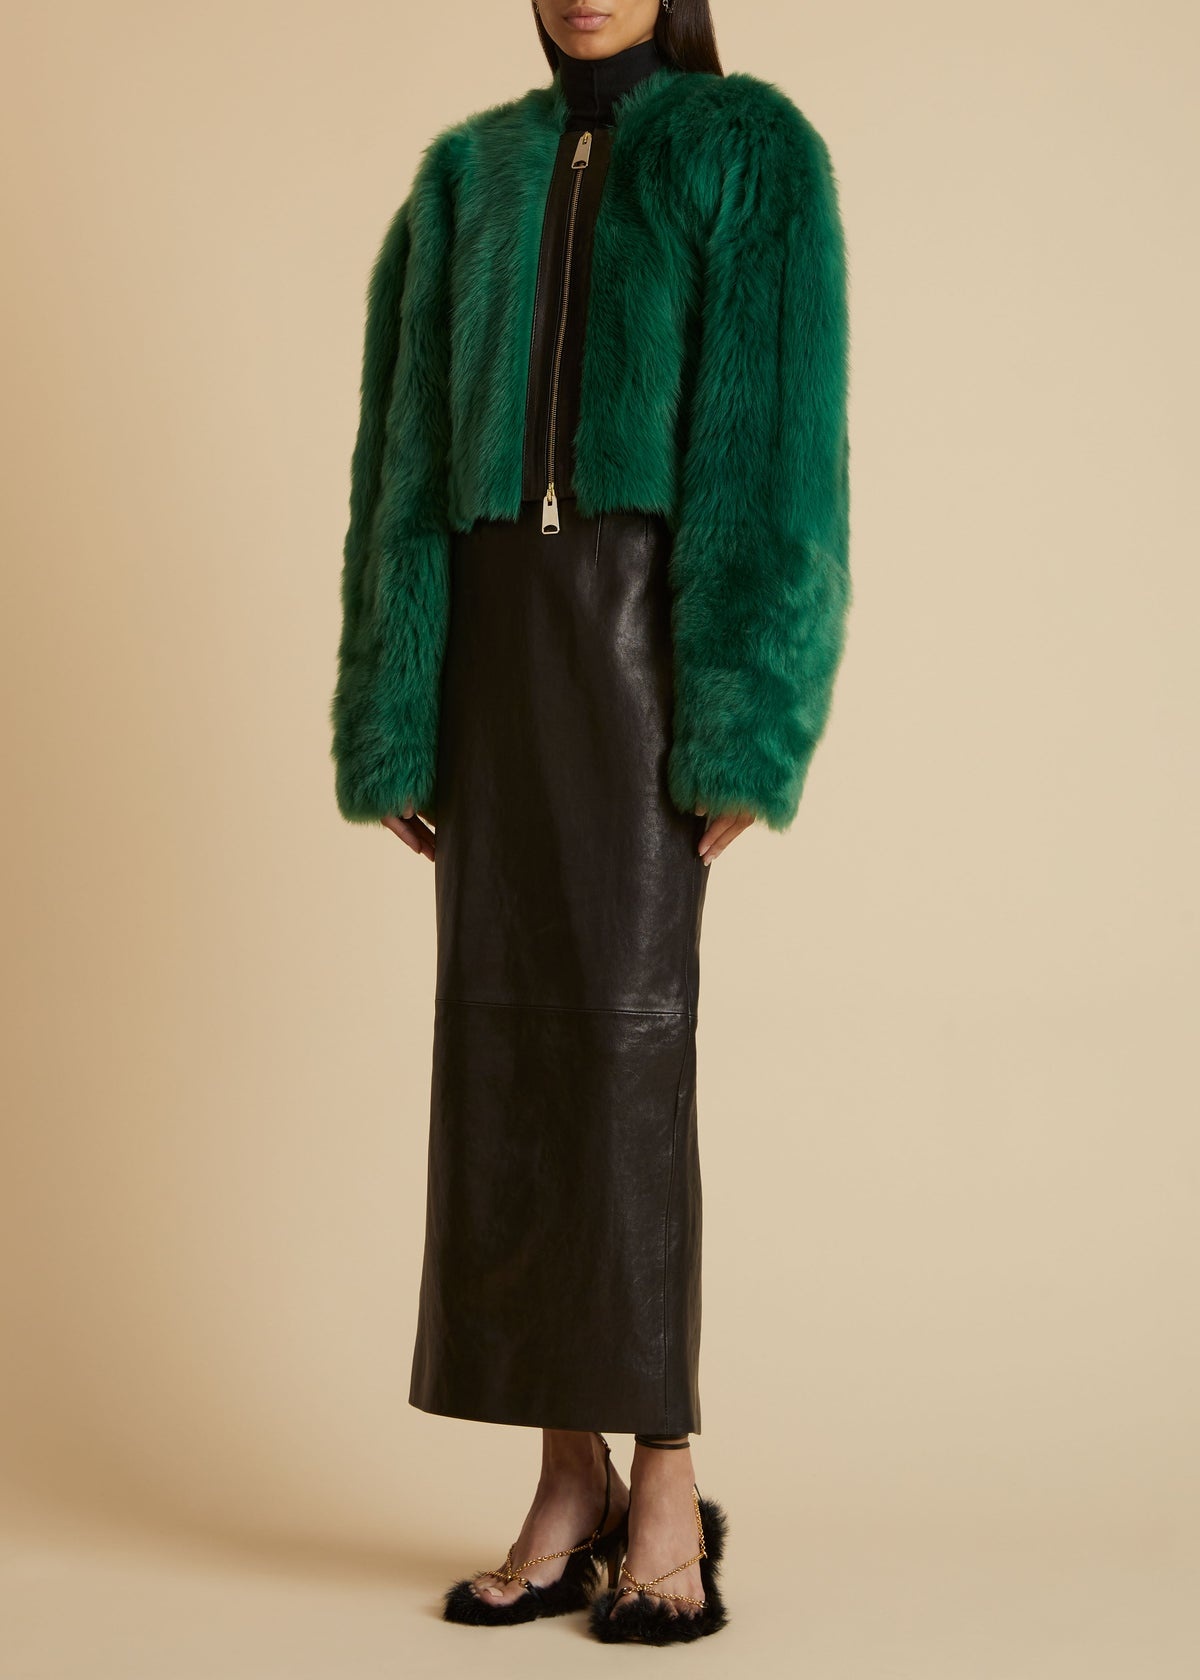 The Gracell Jacket in Forest Green Shearling - 1